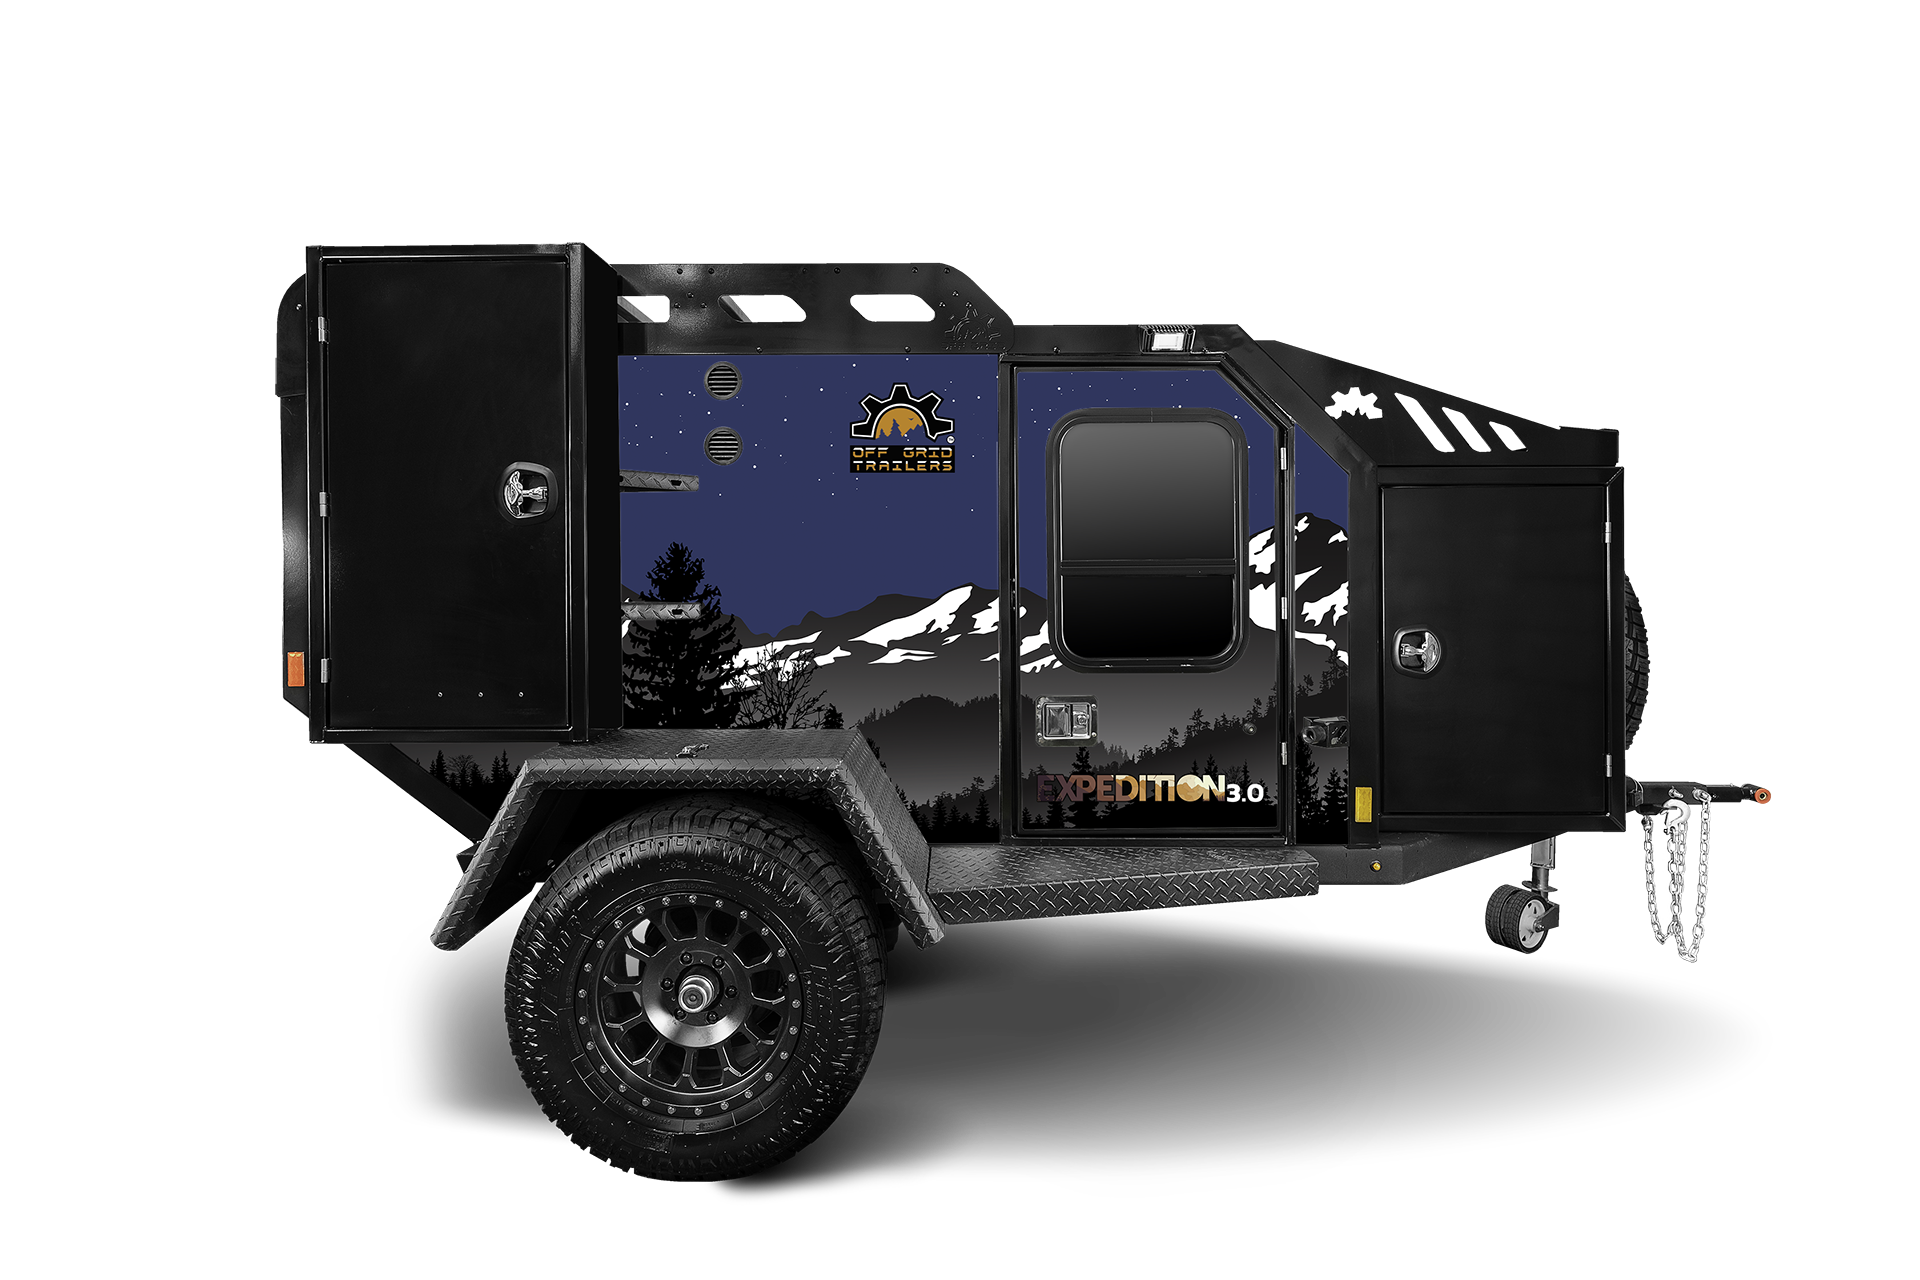 2024 EXPEDITION 3.0 OVERLAND TRAILER (#3069)